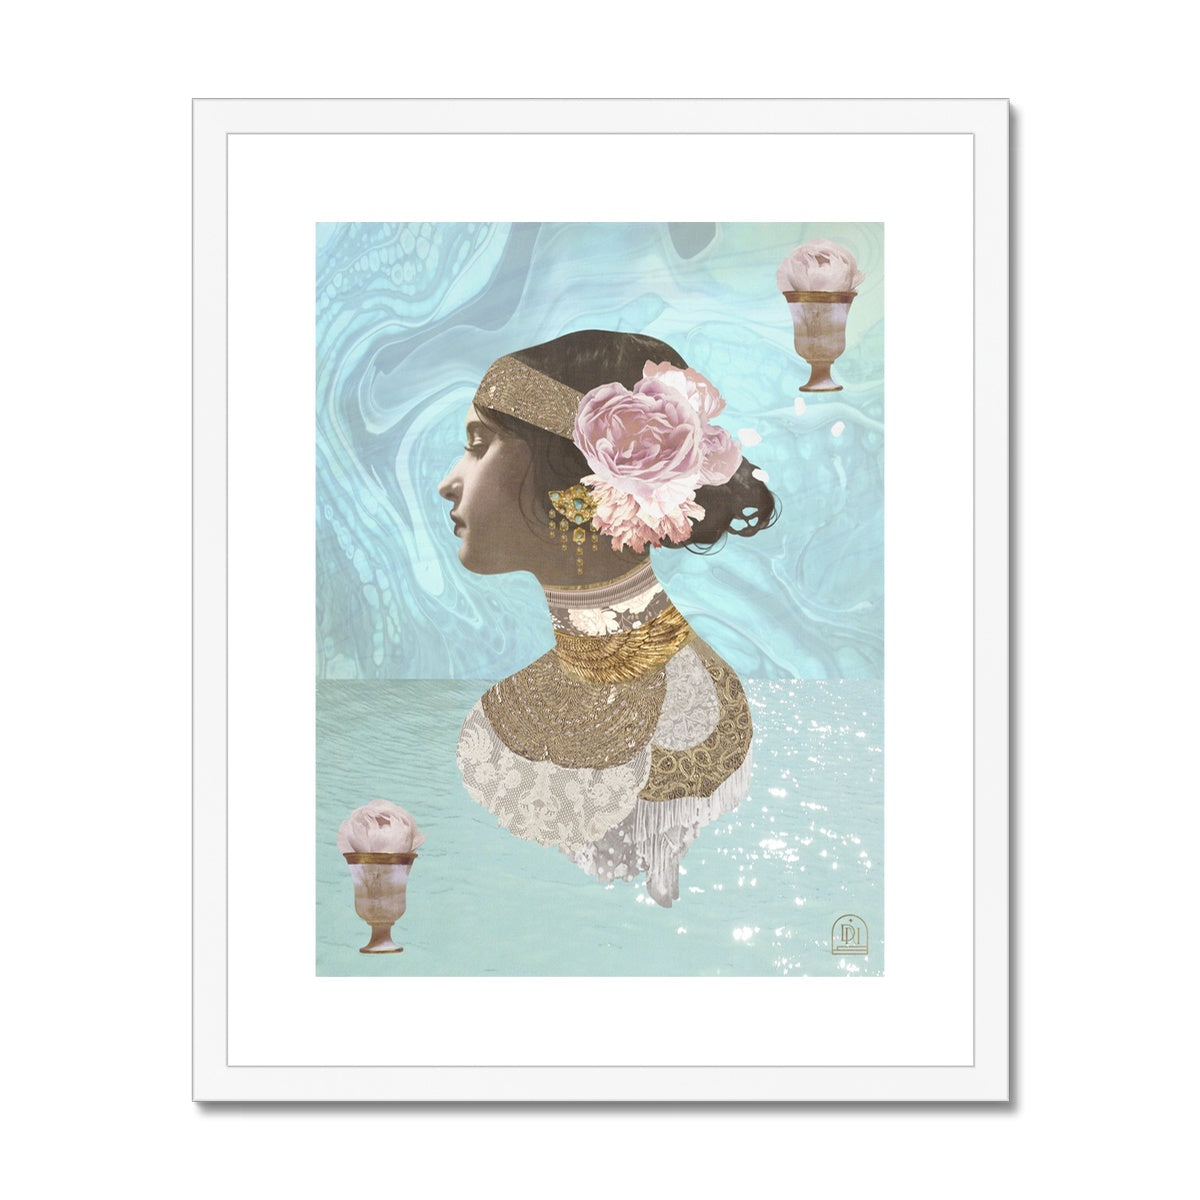 Queen of Cups Framed & Mounted Print - Starseed Designs Inc.